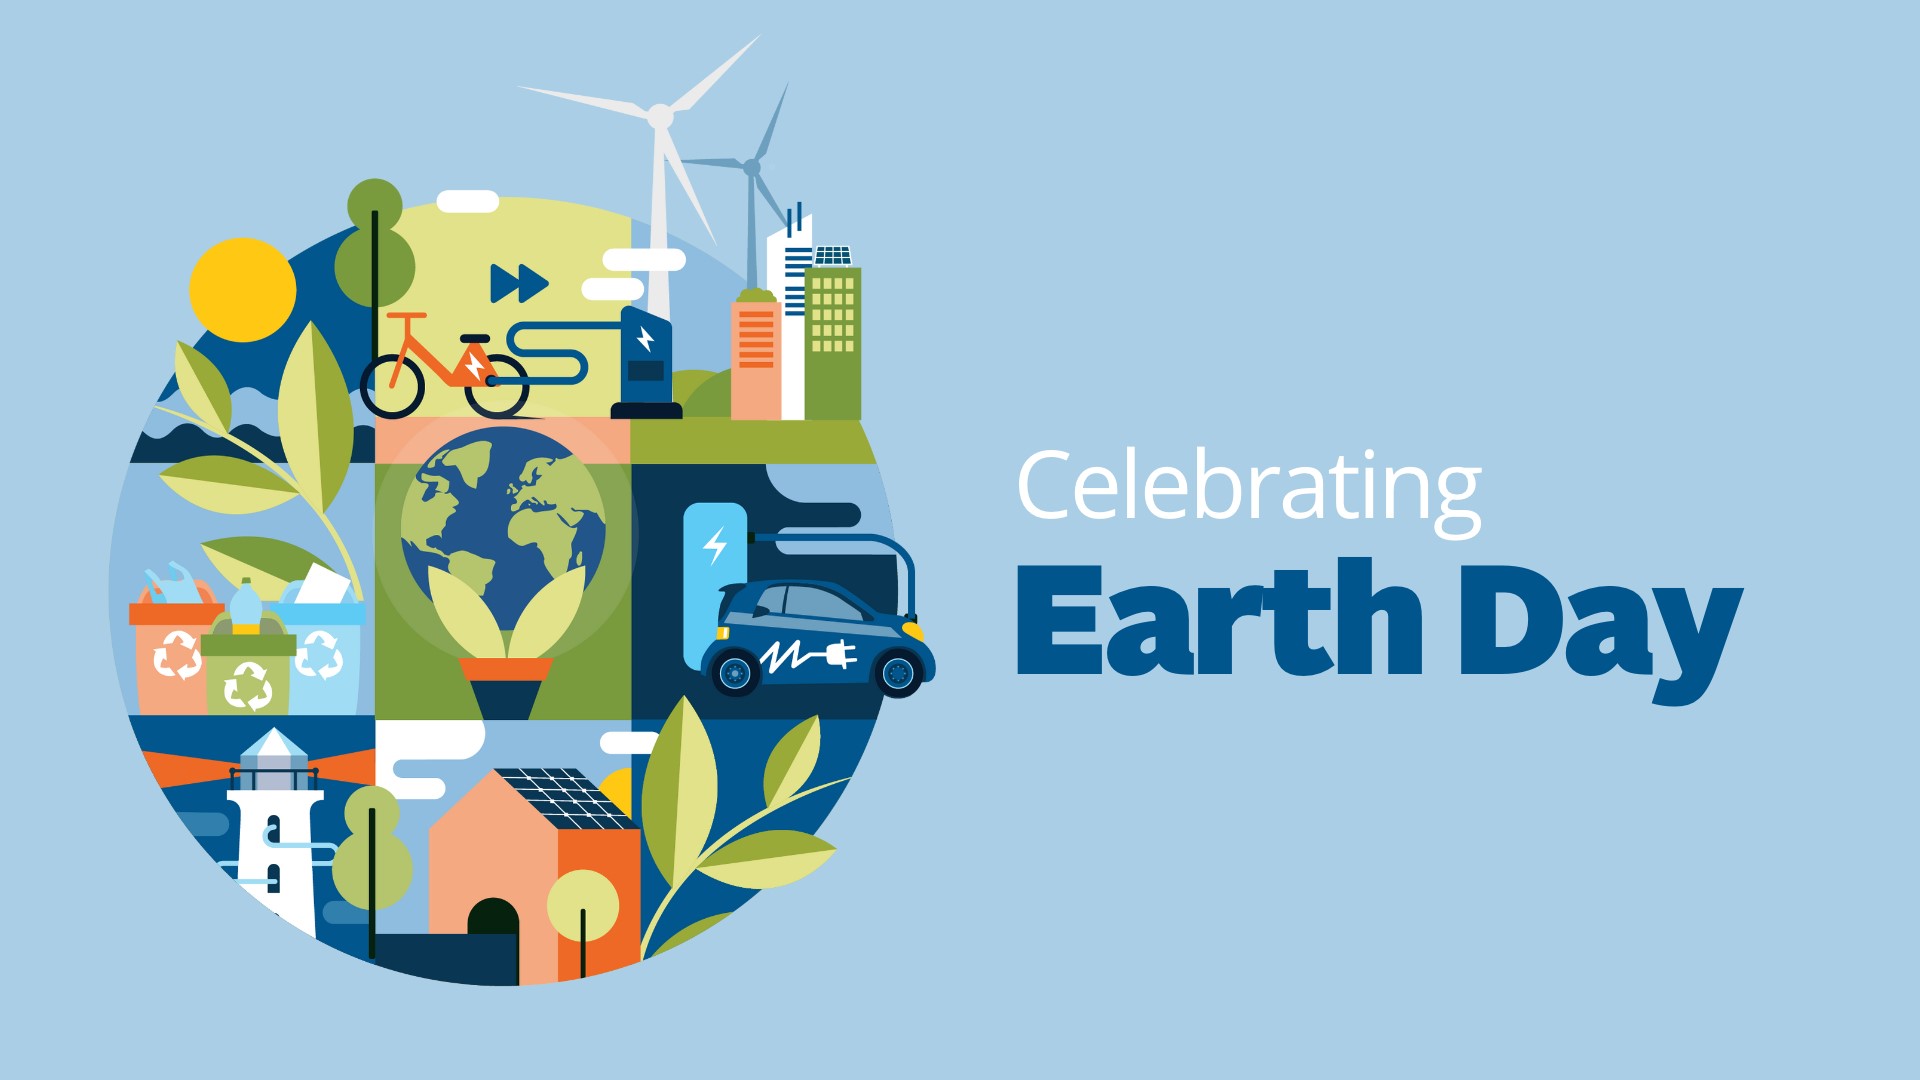 icons representing climate action with the words "celebrating Earth Day" over a light blue background